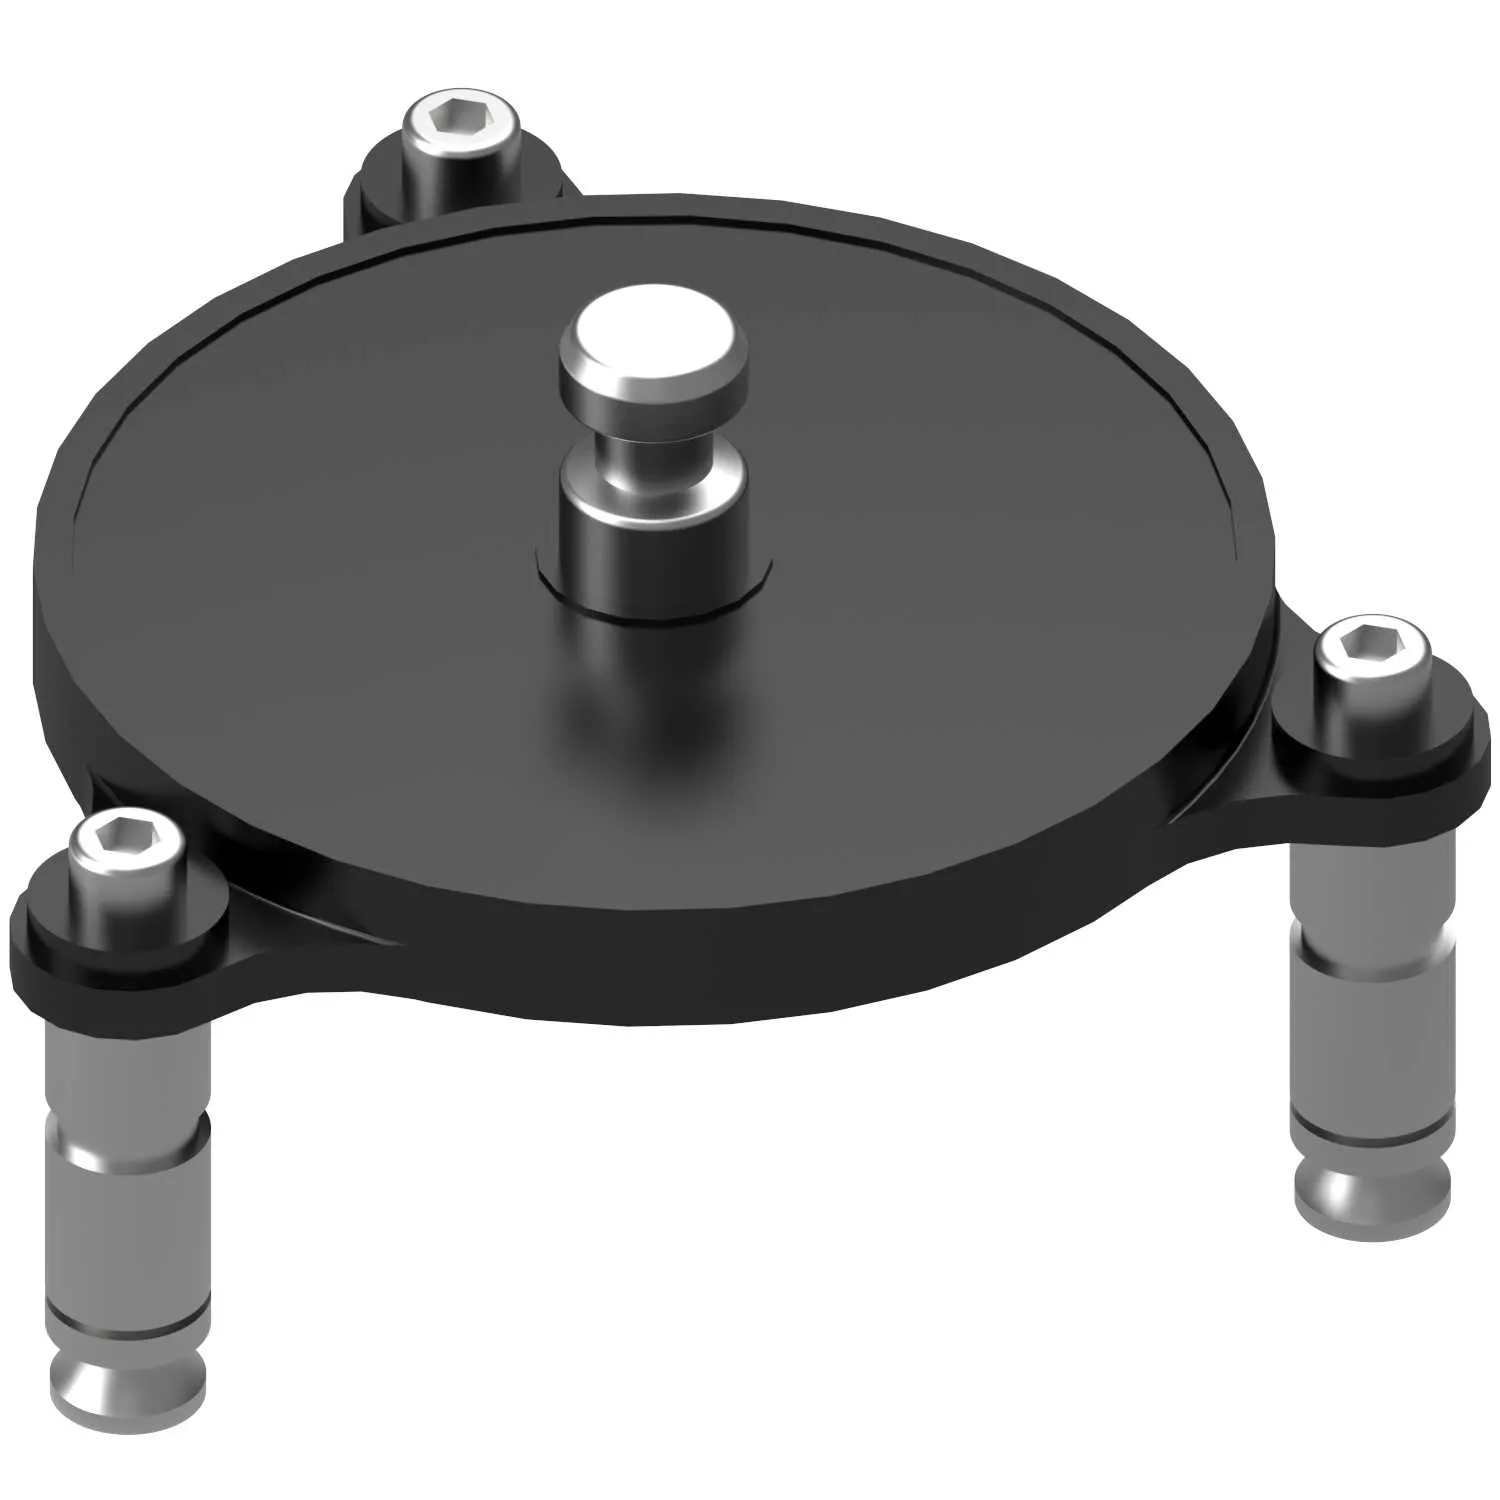 Leica GAD121 Adapter Plate for flexible mounting of the RTC360